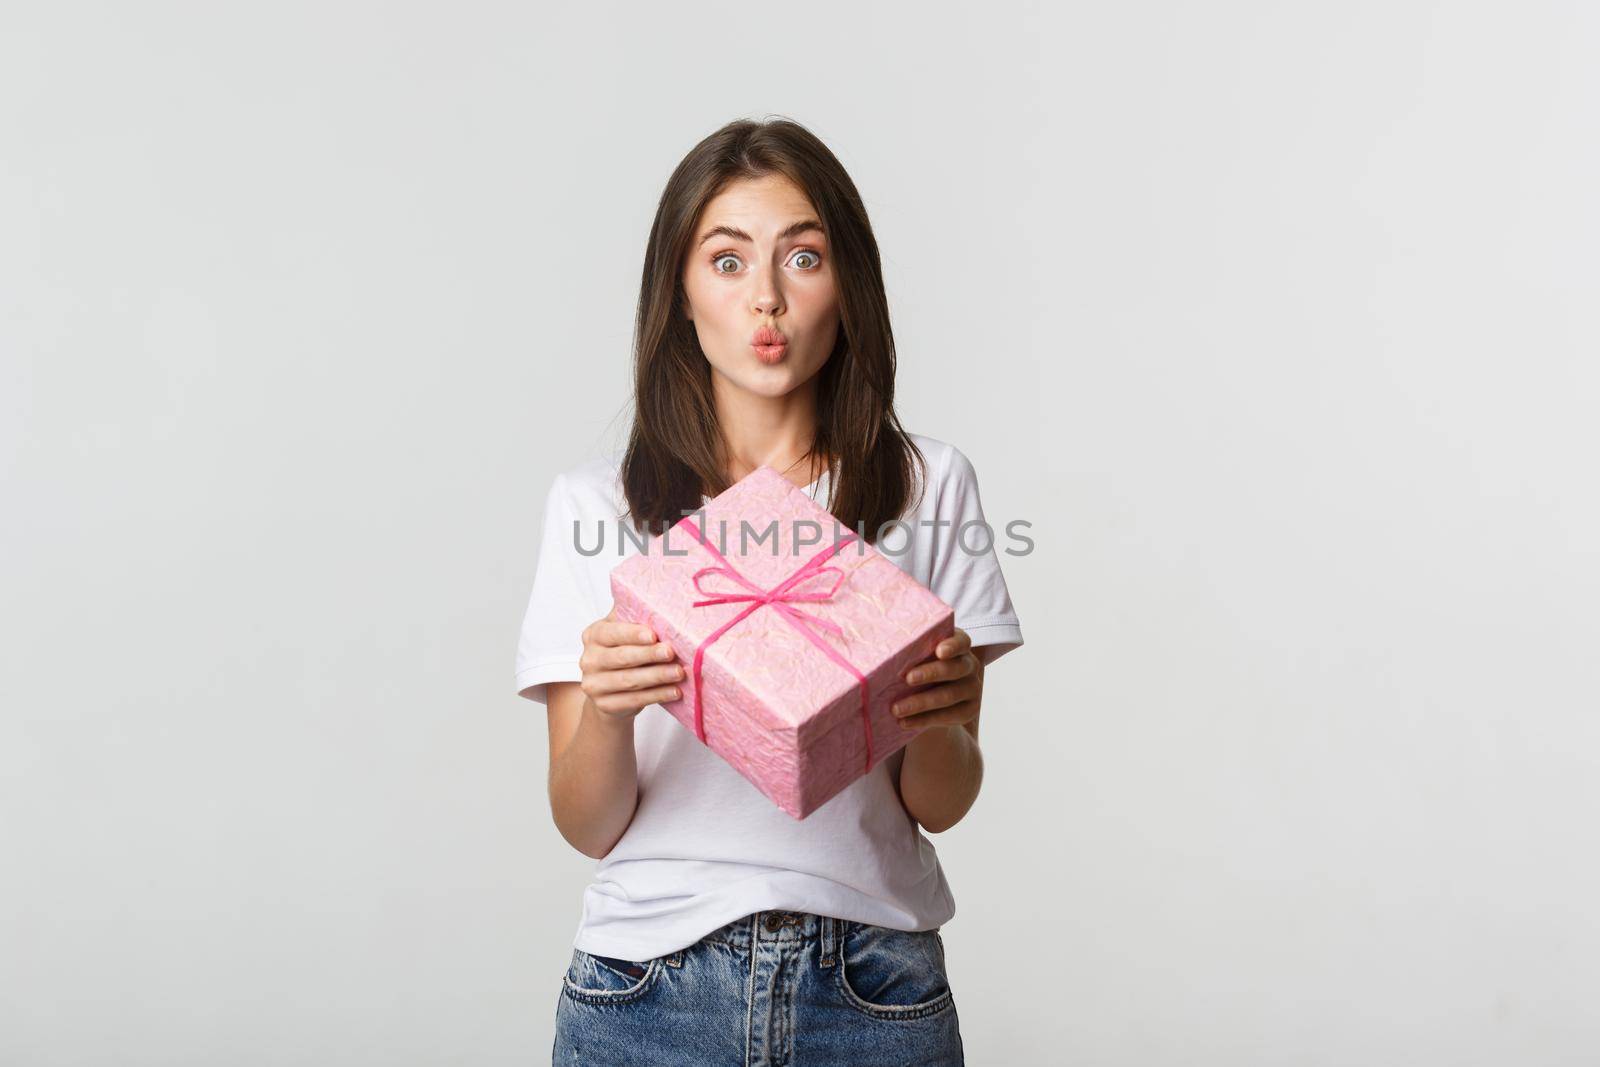 Surprised happy birthday girl receiving wrapped gift, white background.